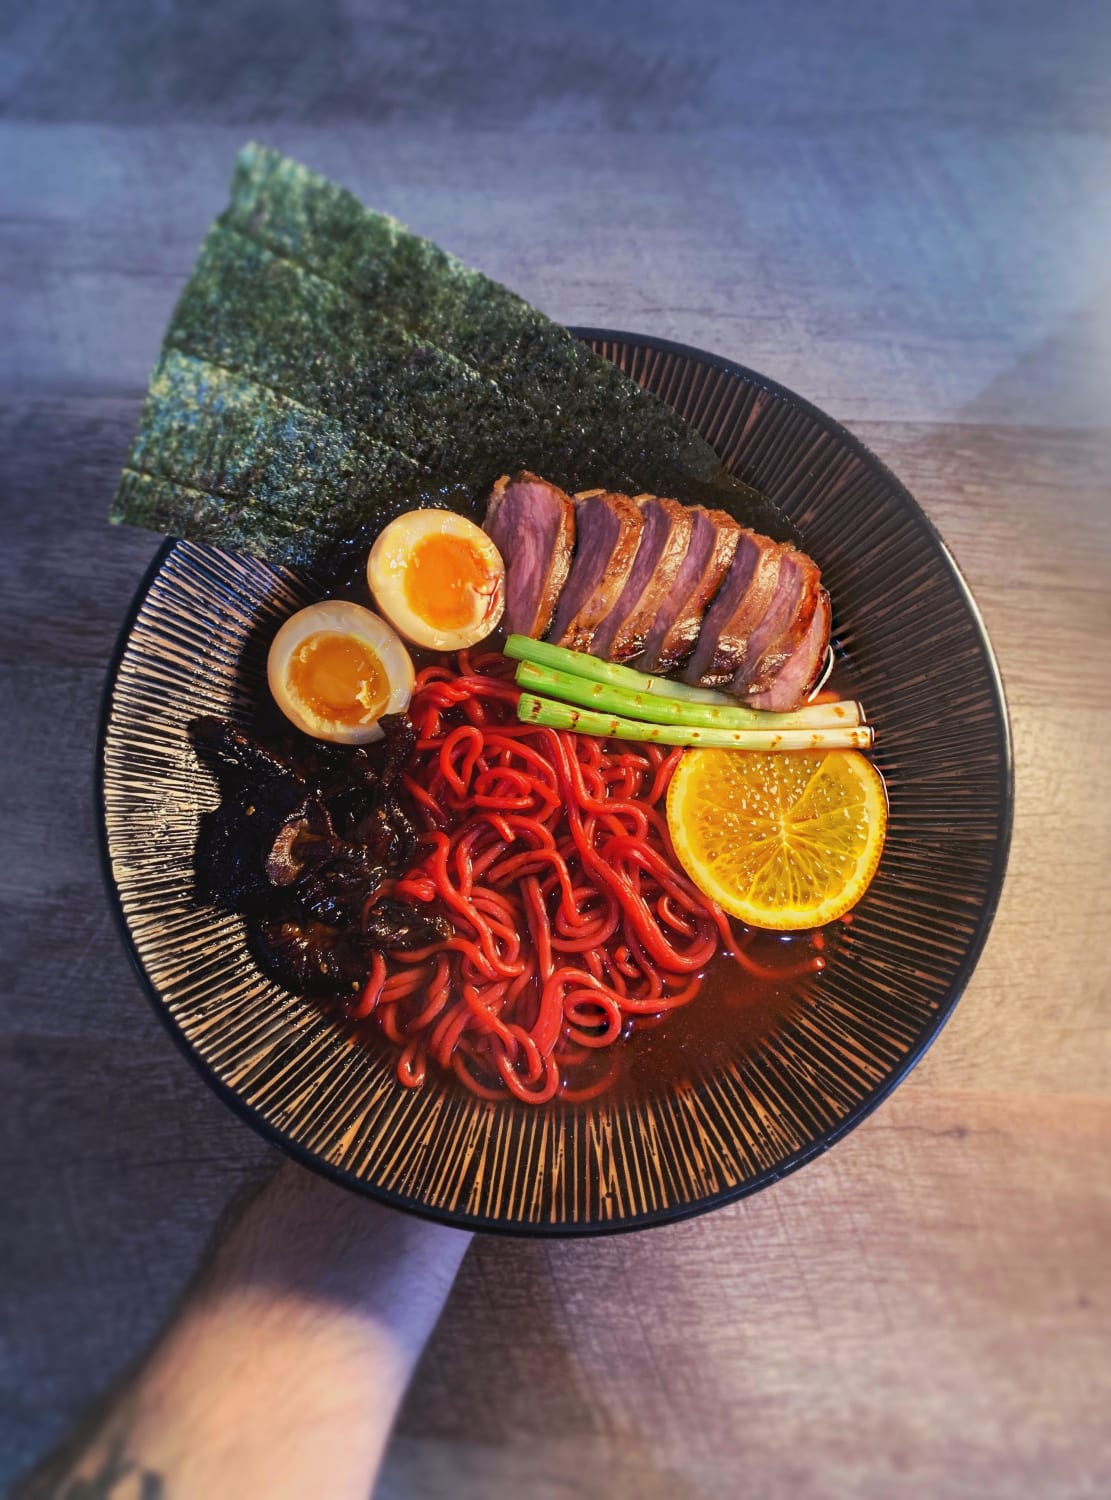 This was an experimental ramen I made with beetroot and wasabi noodles in a shio broth, pan roasted duck and black garlic shiitake. So good!